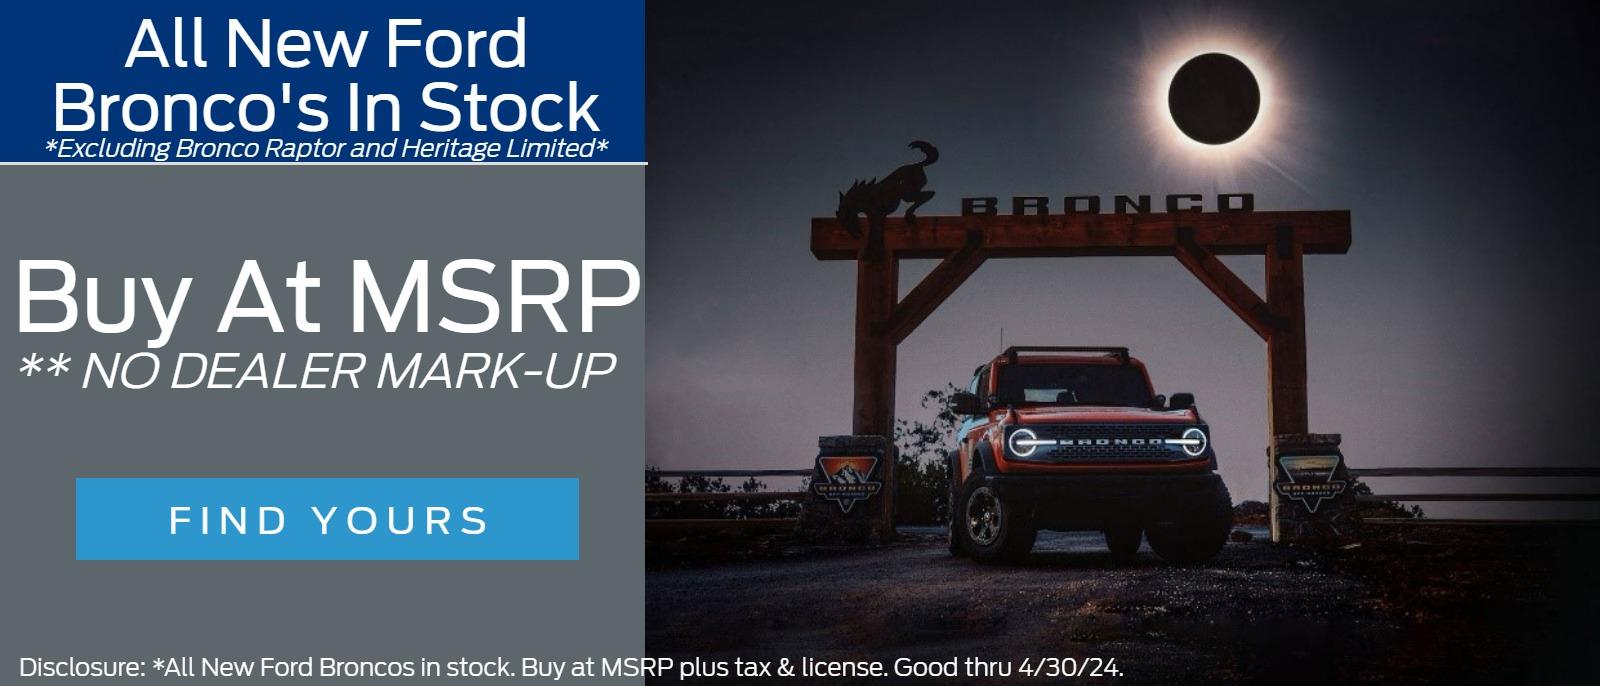 All New Ford Bronco’s 
In Stock          
*Excluding Bronco Raptor and Heritage Limited*
 Buy at MSRP 
** NO DEALER MARK-UP  

Disclosure: *All New Ford Broncos in stock. Buy at MSRP plus tax & license. Good thru 4/30/24.